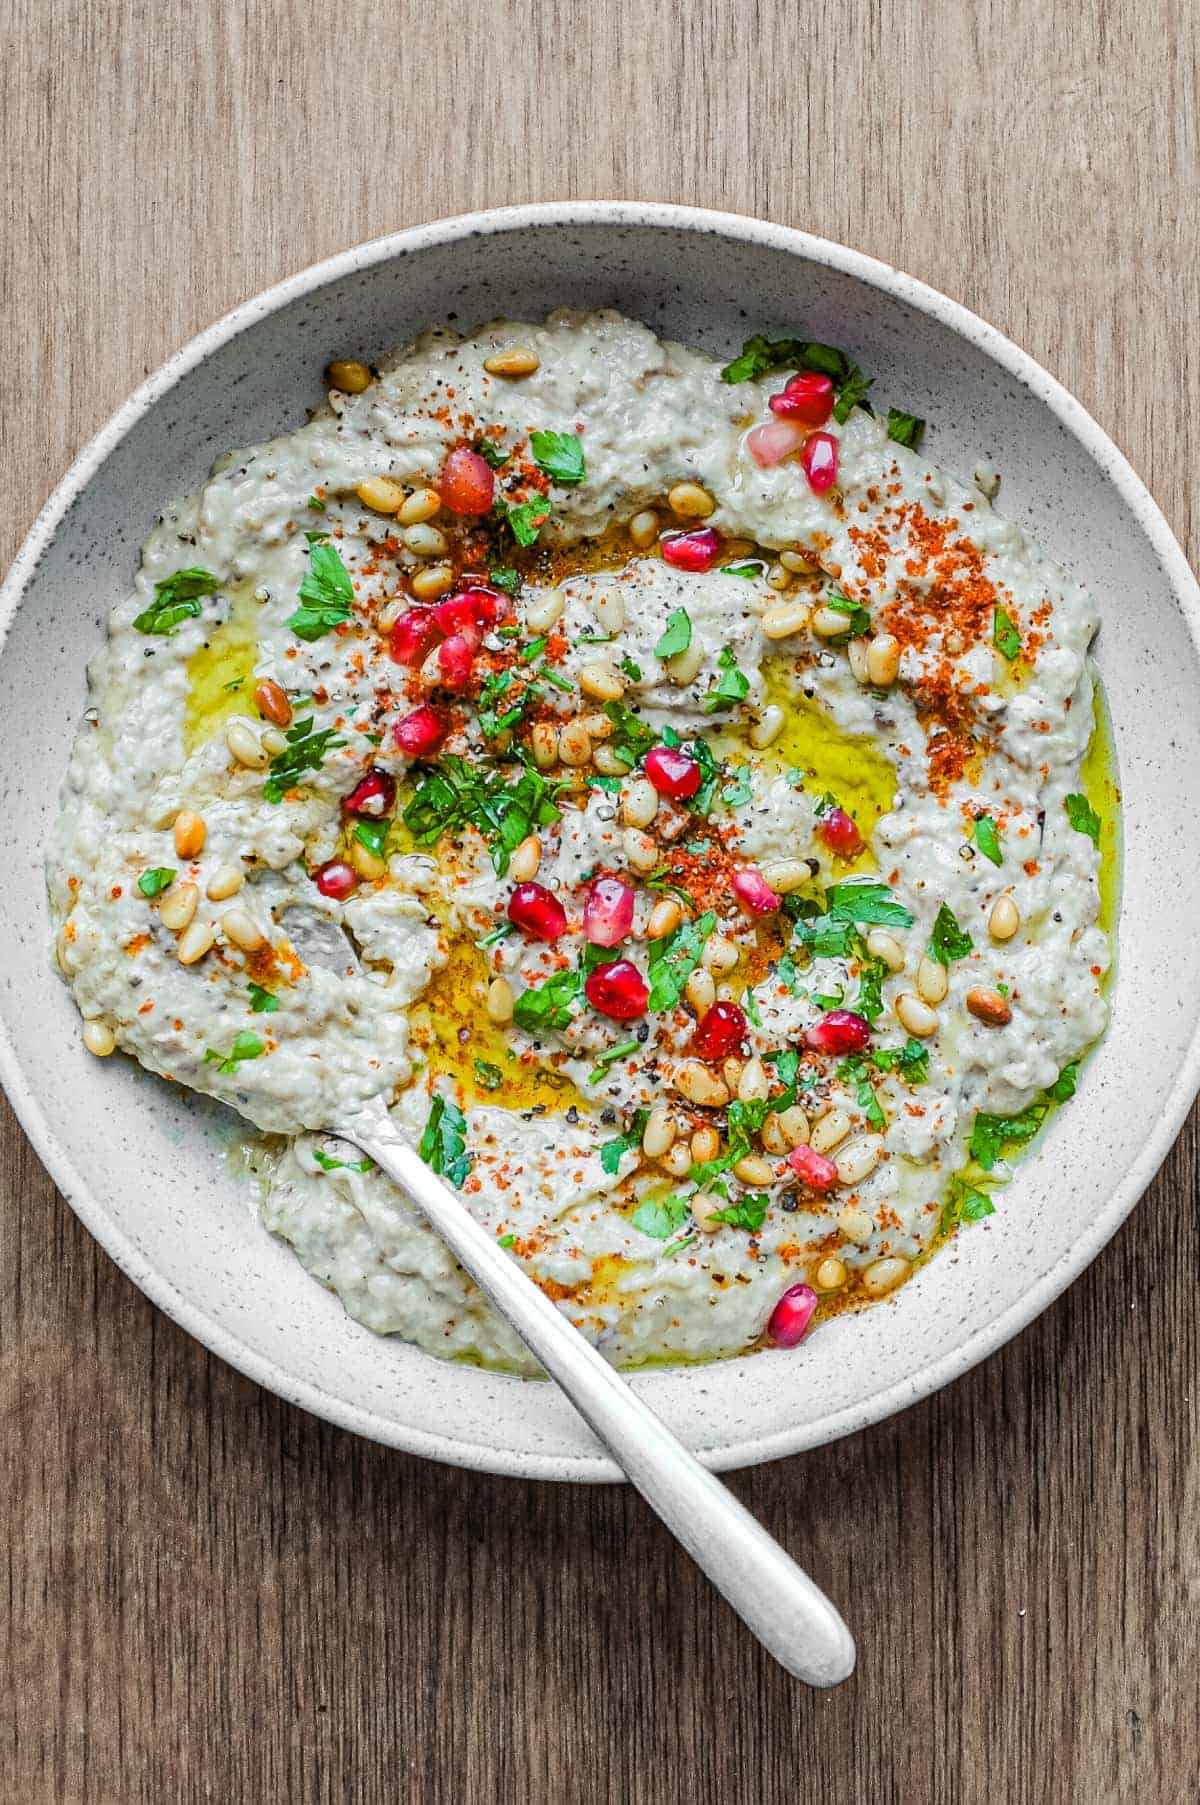 A platter of Baba Ghanoush garnished with parsley, pine nuts and pomegranate seeds